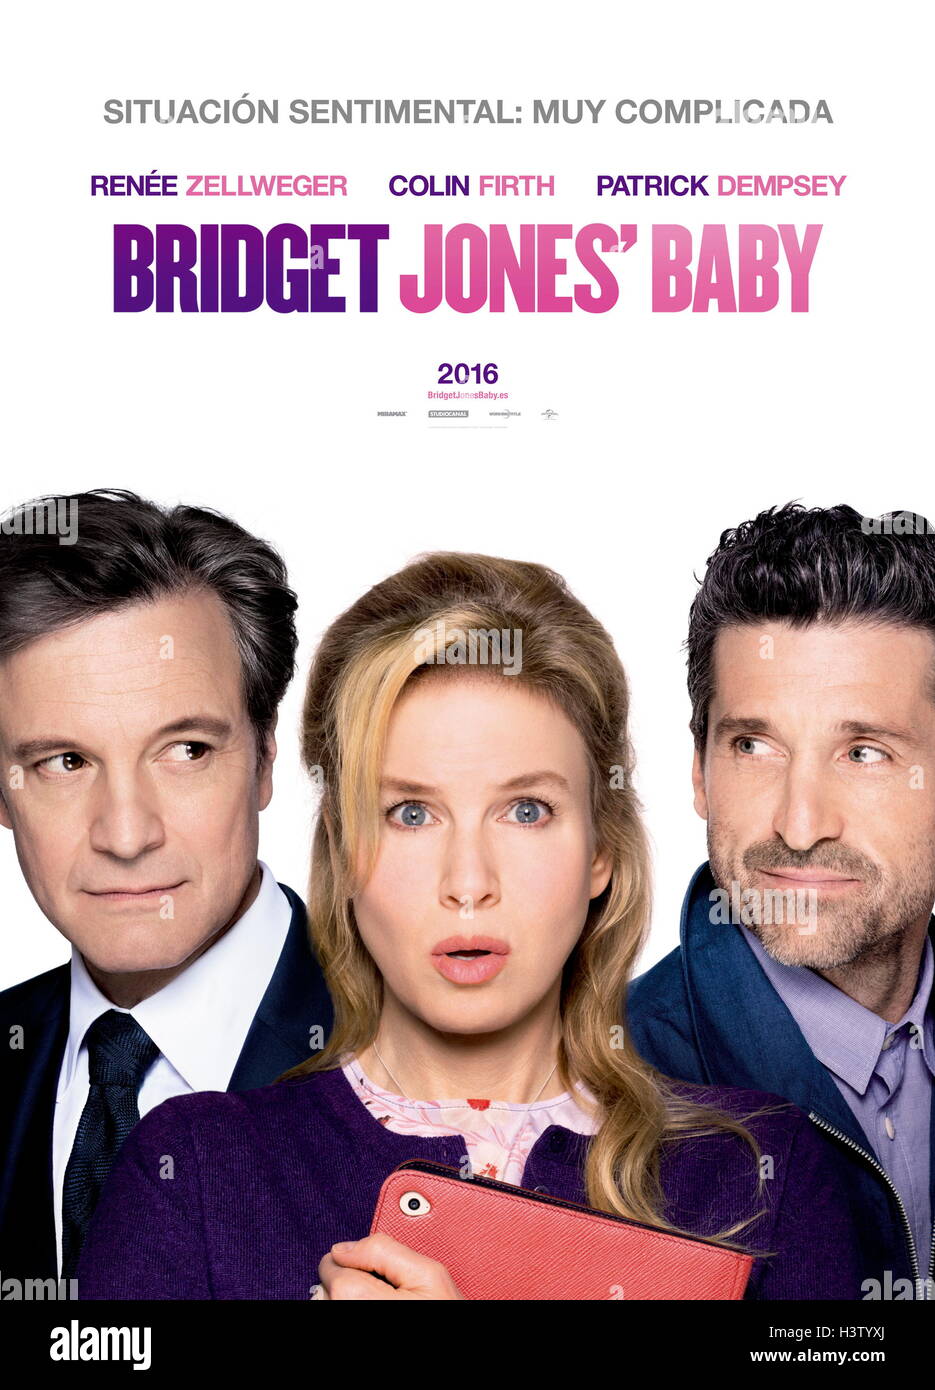 RELEASE DATE: September 16, 2016 TITLE: Bridget Jones's Baby STUDIO: Universal Pictures DIRECTOR: Sharon Maguire PLOT: The continuing adventures of British publishing executive Bridget Jones as she enters her 40s STARRING: Renee Zellweger, Colin Firth, Patrick Dempsey (Credit Image: c Universal Pictures/Entertainment Pictures/) Stock Photo